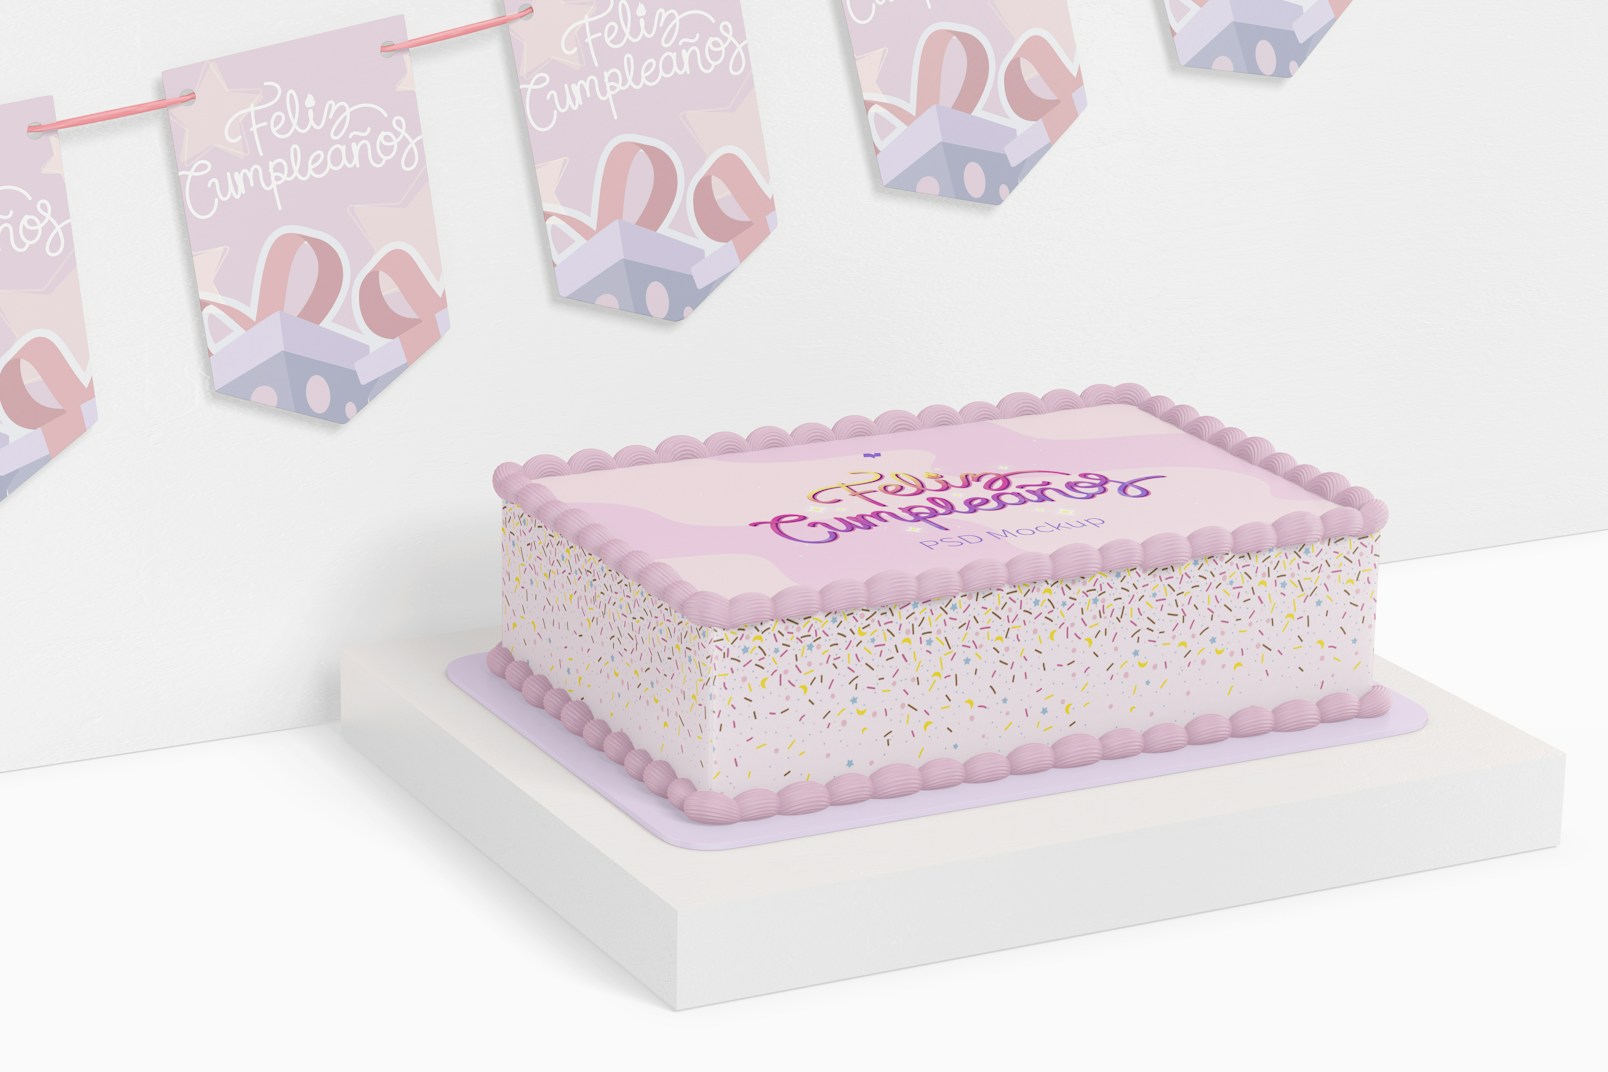 Square Cake with Banners Mockup